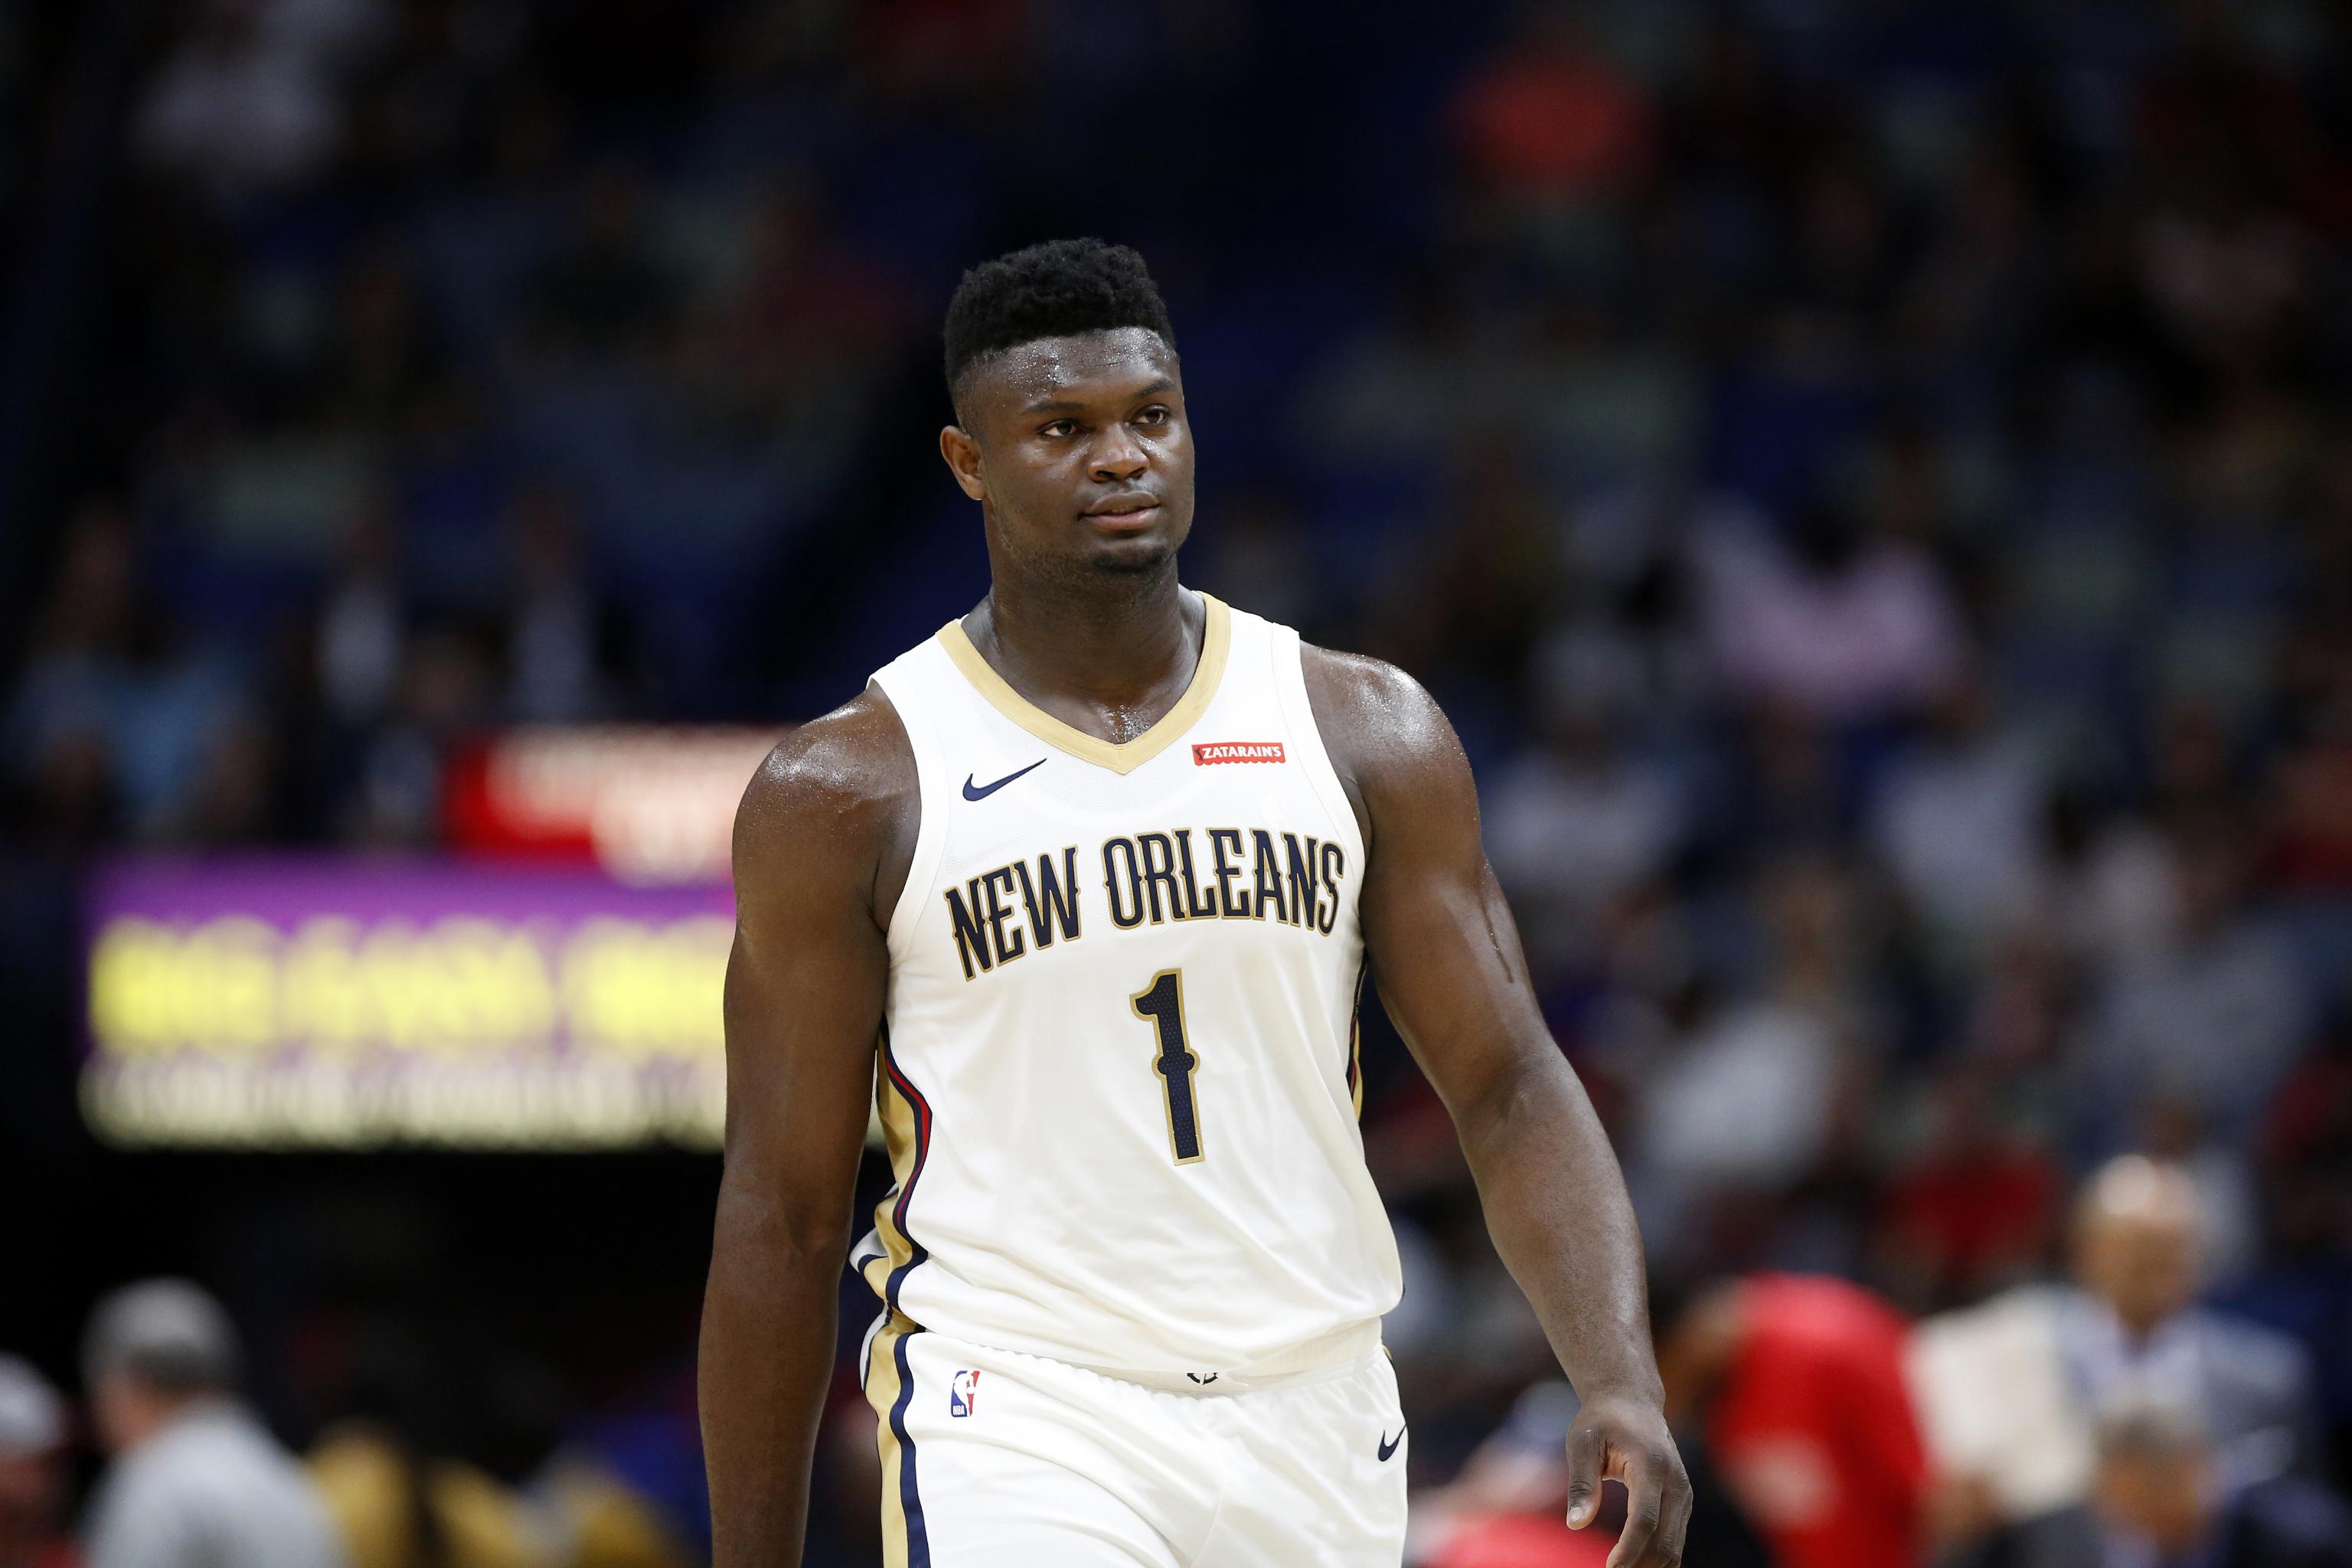 Pelicans plan to play Zion Williamson at small forward